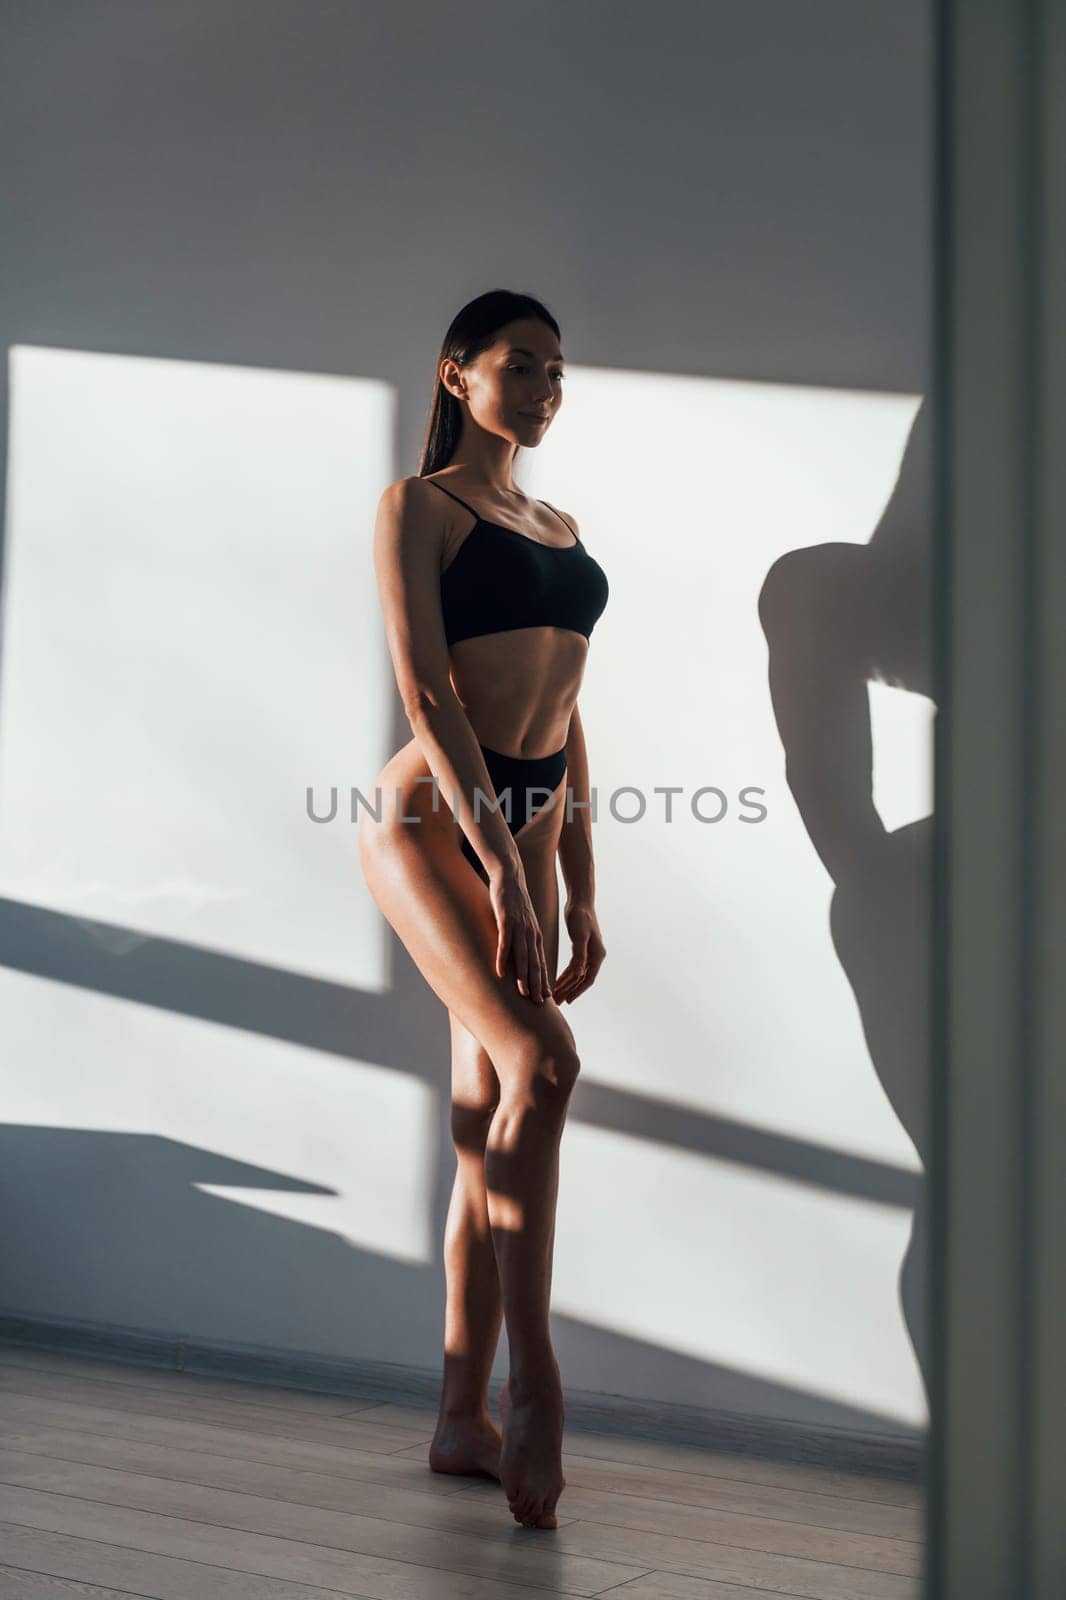 In black underwear. Young caucasian woman with slim body shape is indoors at daytime.